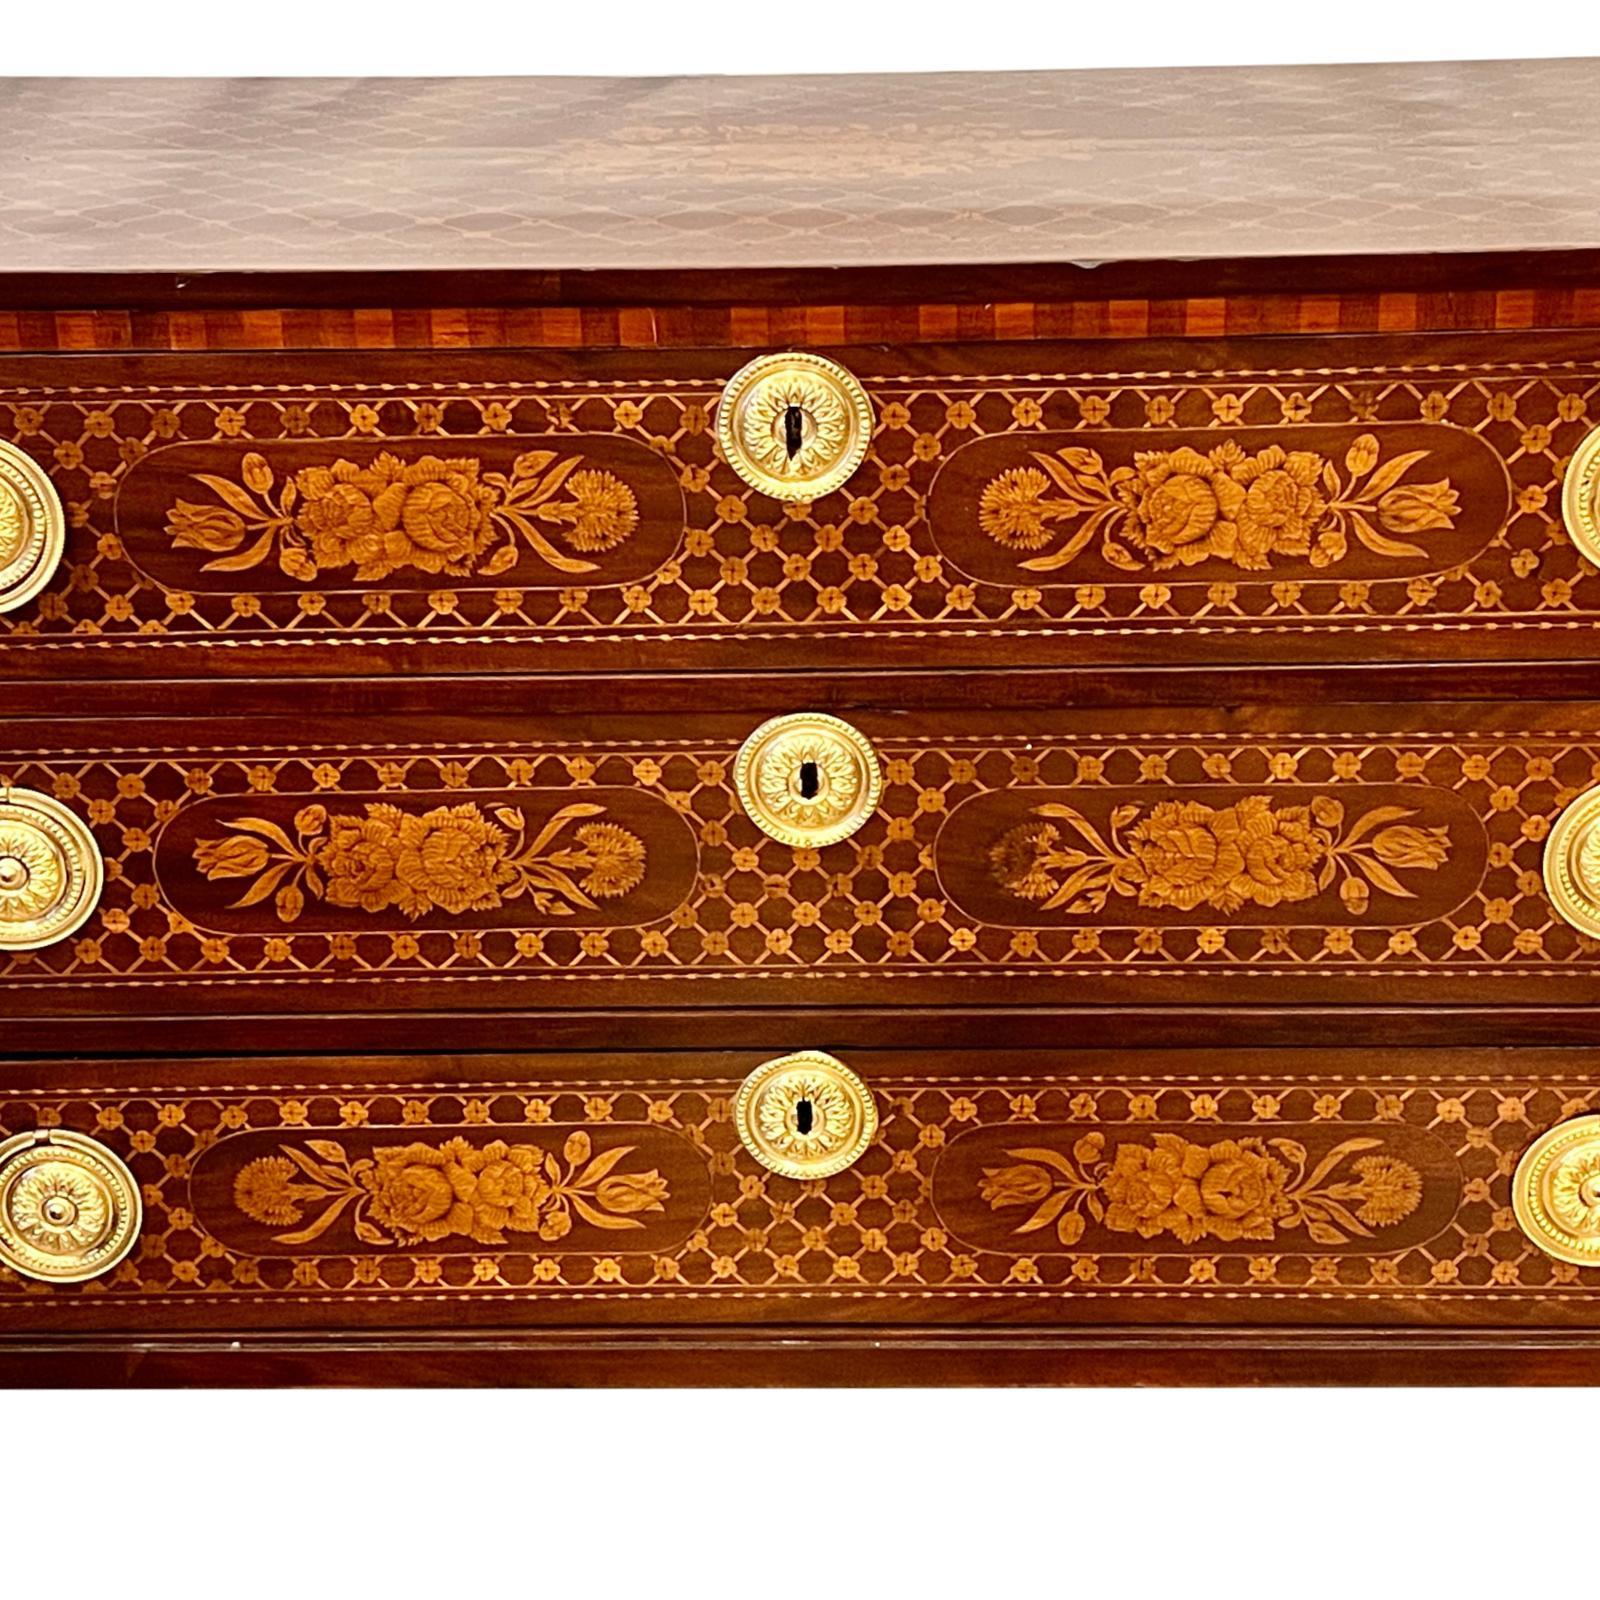 A mid to late 19th century French mahogany marquetry chest of drawers with gilt fittings.

Measurements:
Height: 33